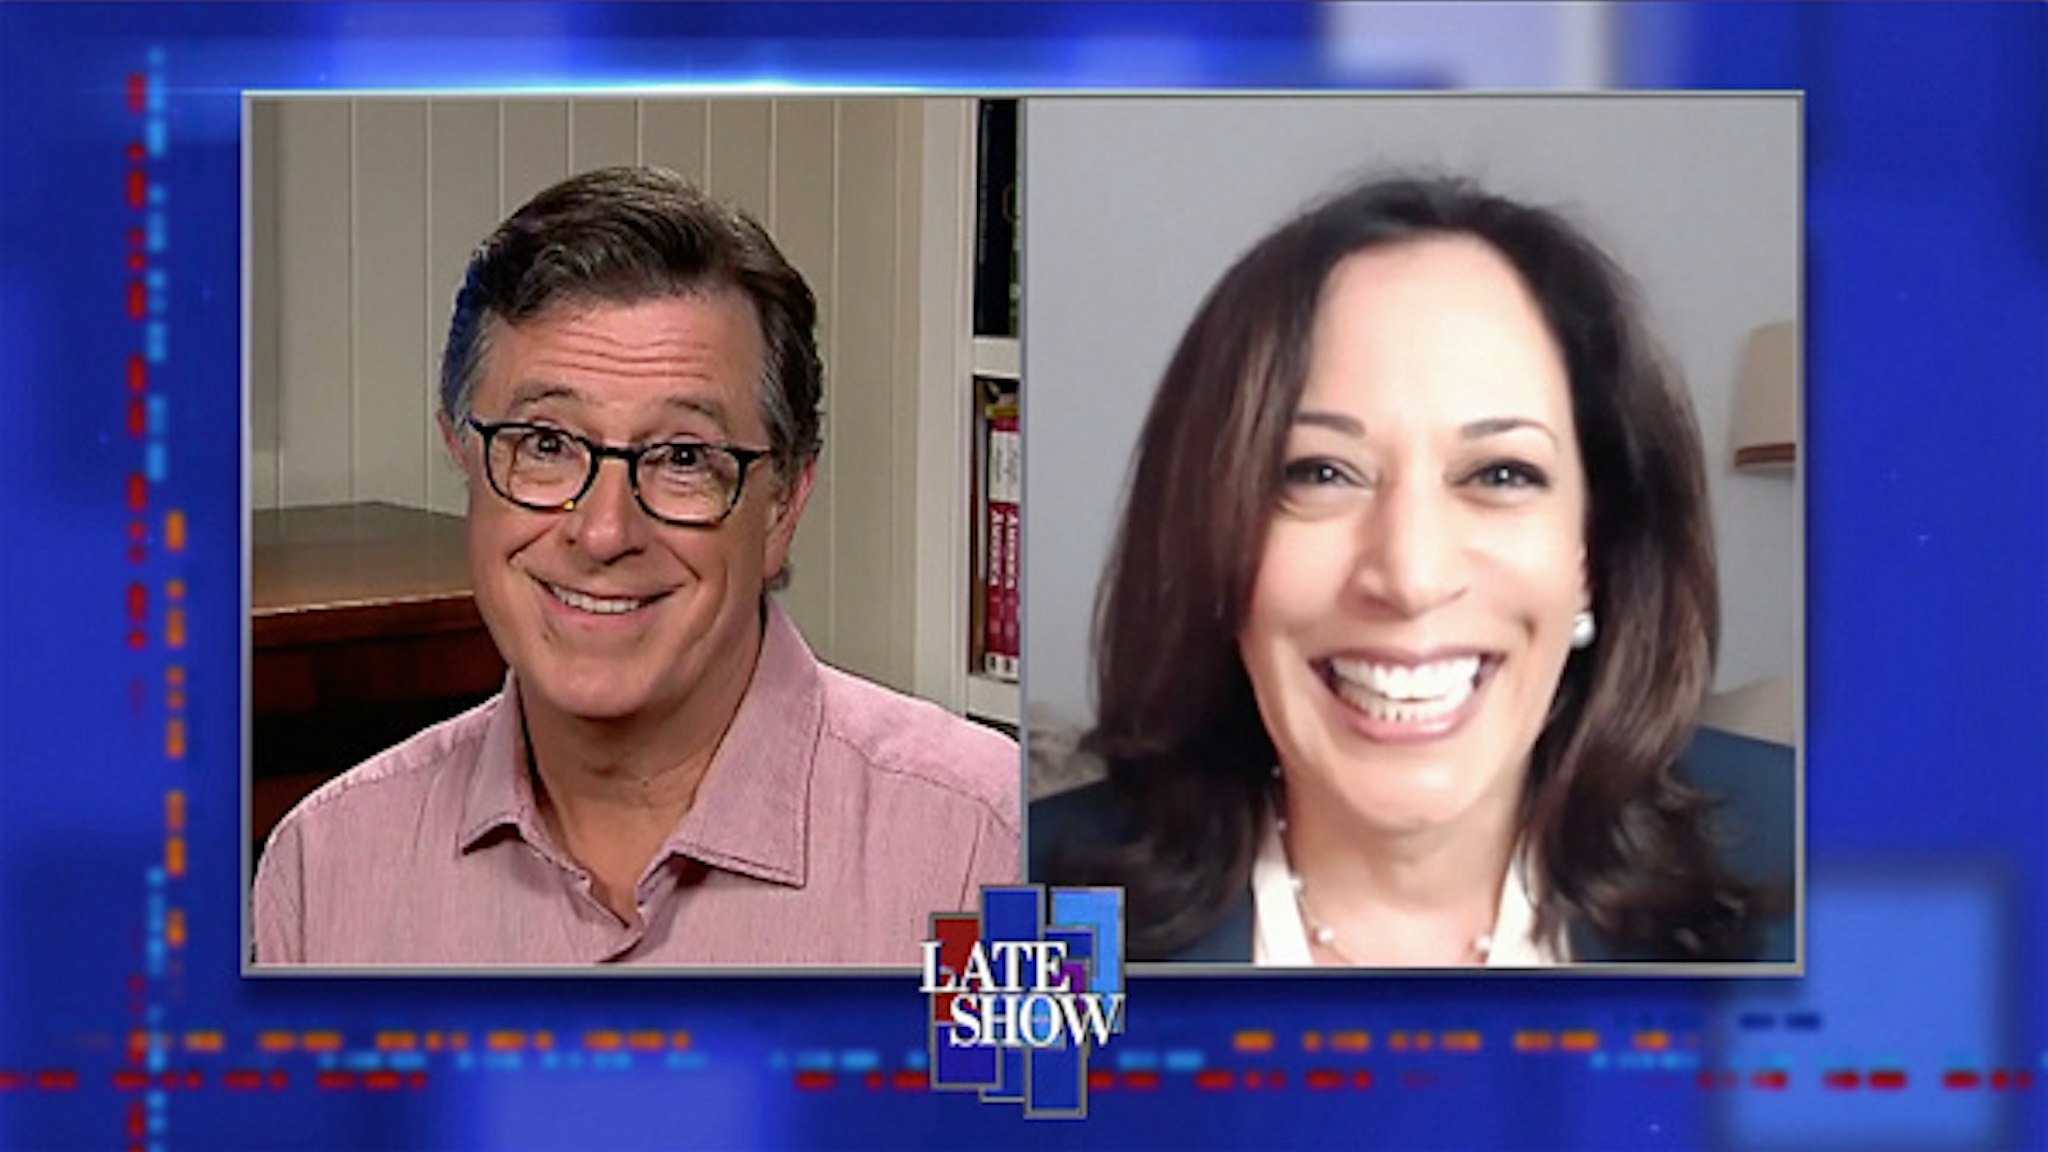 NEW YORK - JUNE 17: The Late Show with Stephen Colbert and Senator Kamala Harris during Tuesday June 16, 2020 show. Image is a screen grab.